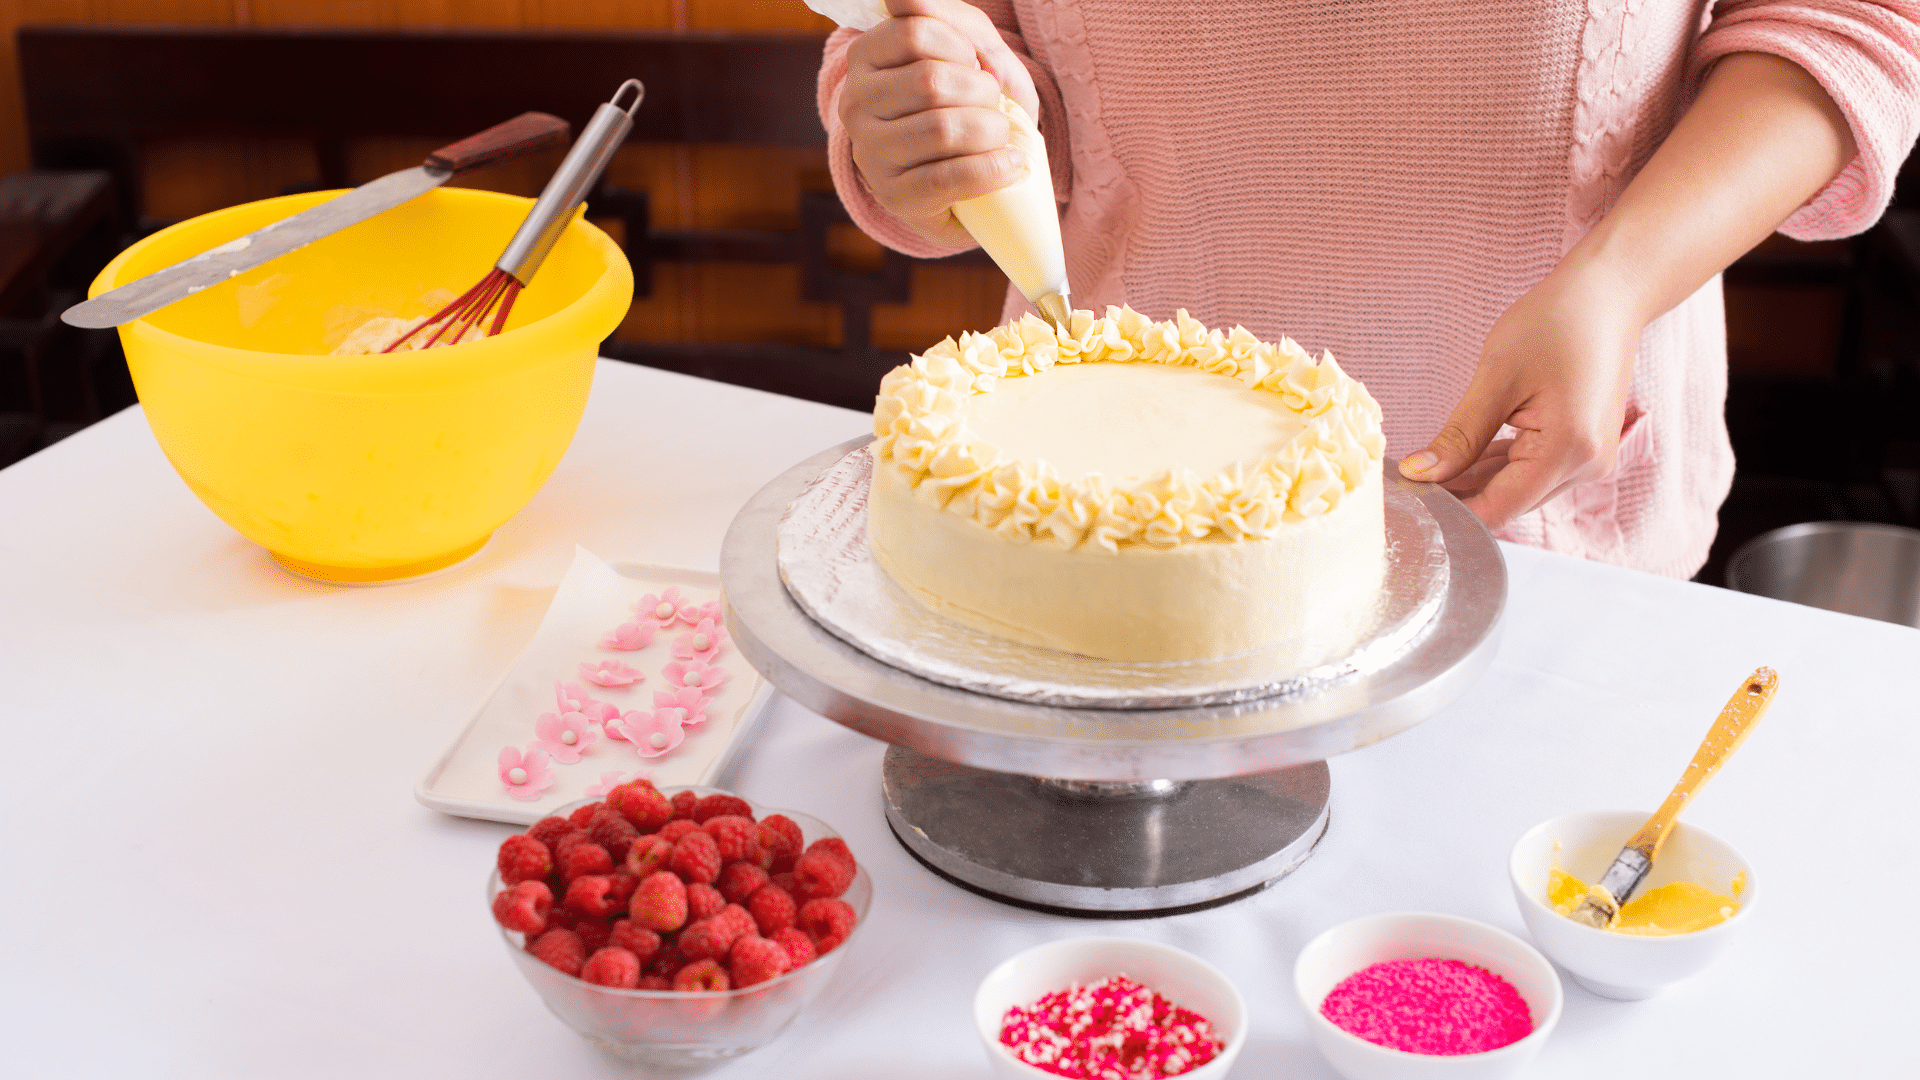 Hands-On Cake Decorating Class